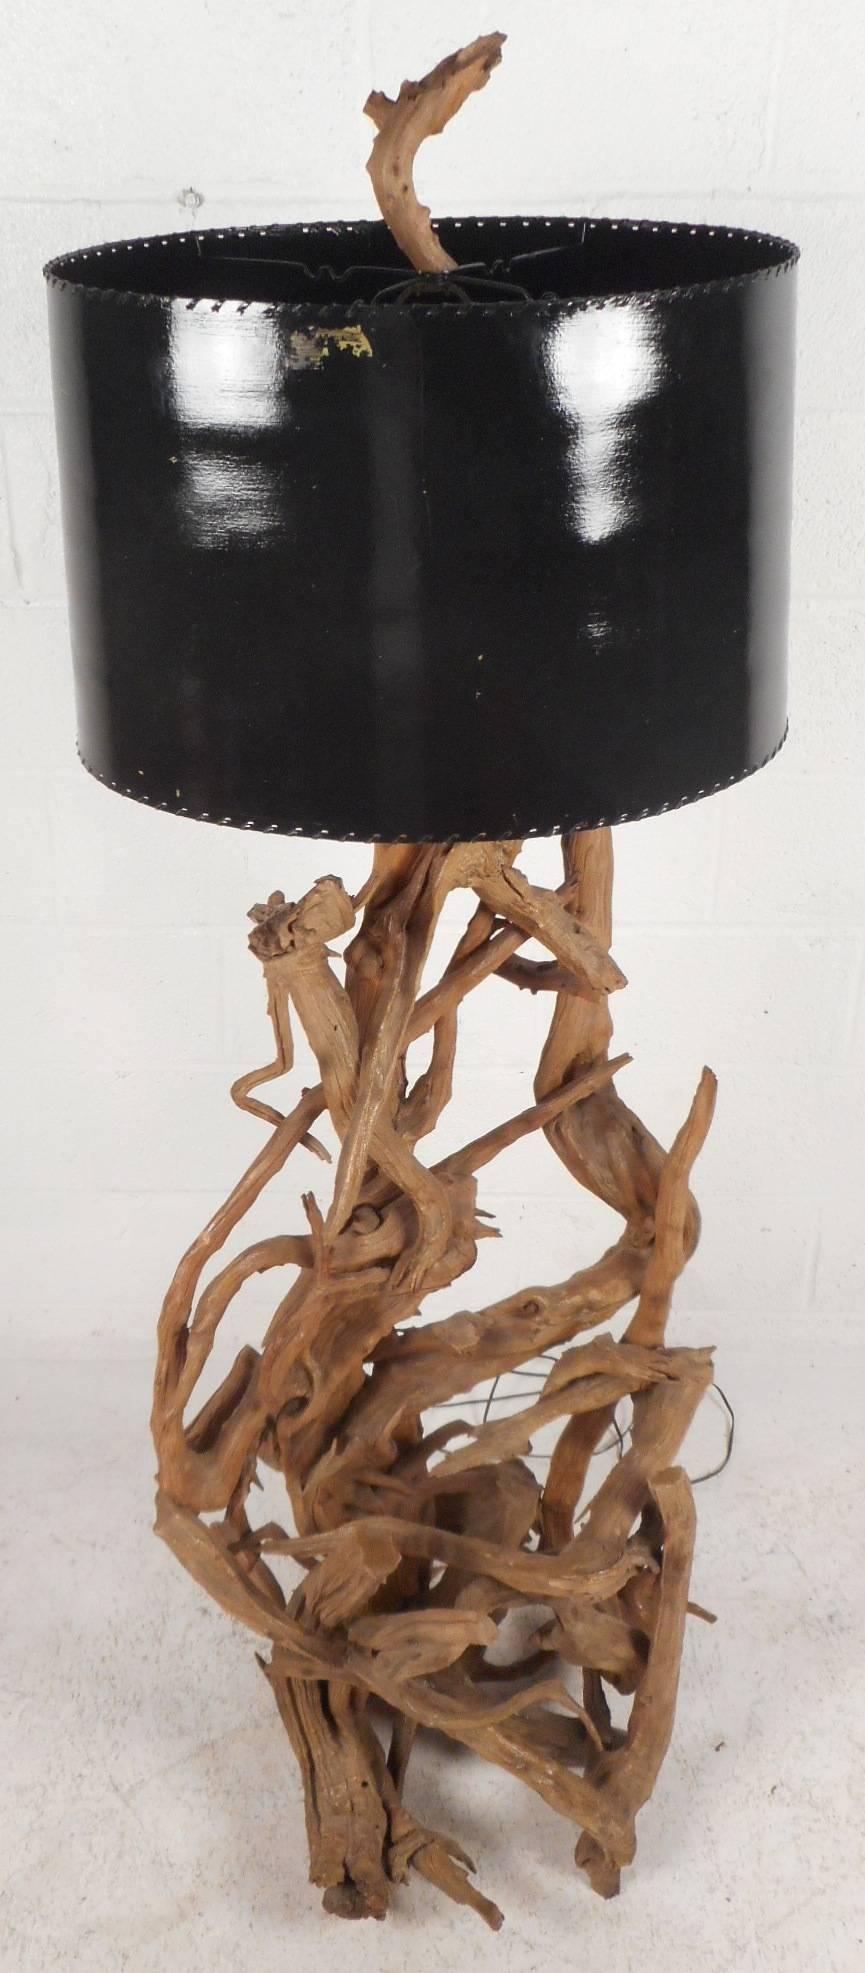 This beautiful vintage modern floor lamp is made of driftwood with many twists and turns throughout. Unique design shows intricate detail and quality craftsmanship. This stylish and sturdy piece makes the perfect eye catching addition to any modern